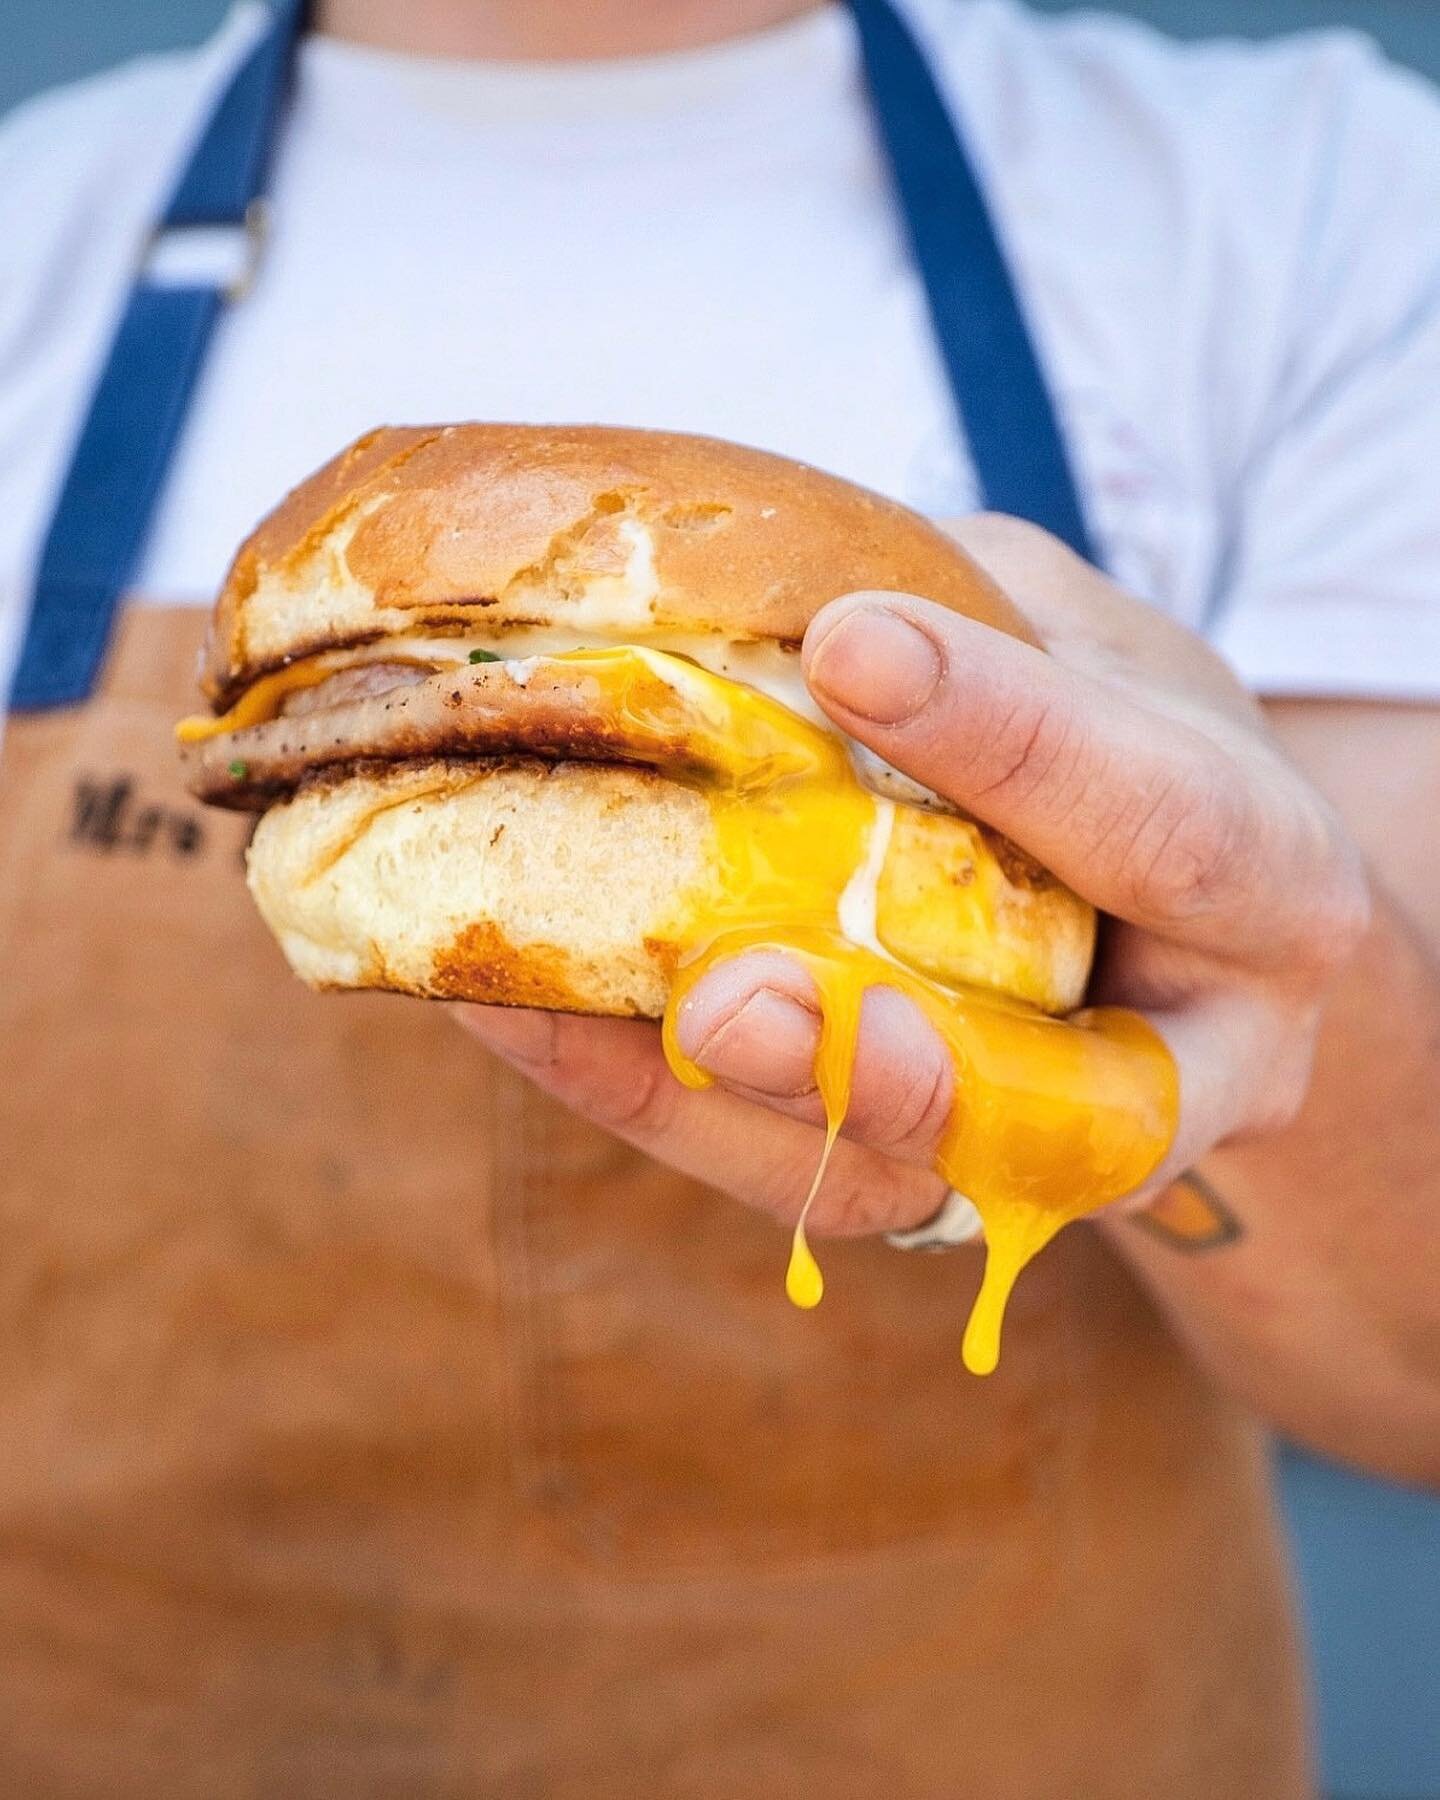 SPAM, EGG AND CHEESE &mdash; PLEASE! 

10-8pm tonight. come get one in your hands.

📷: @opoindex